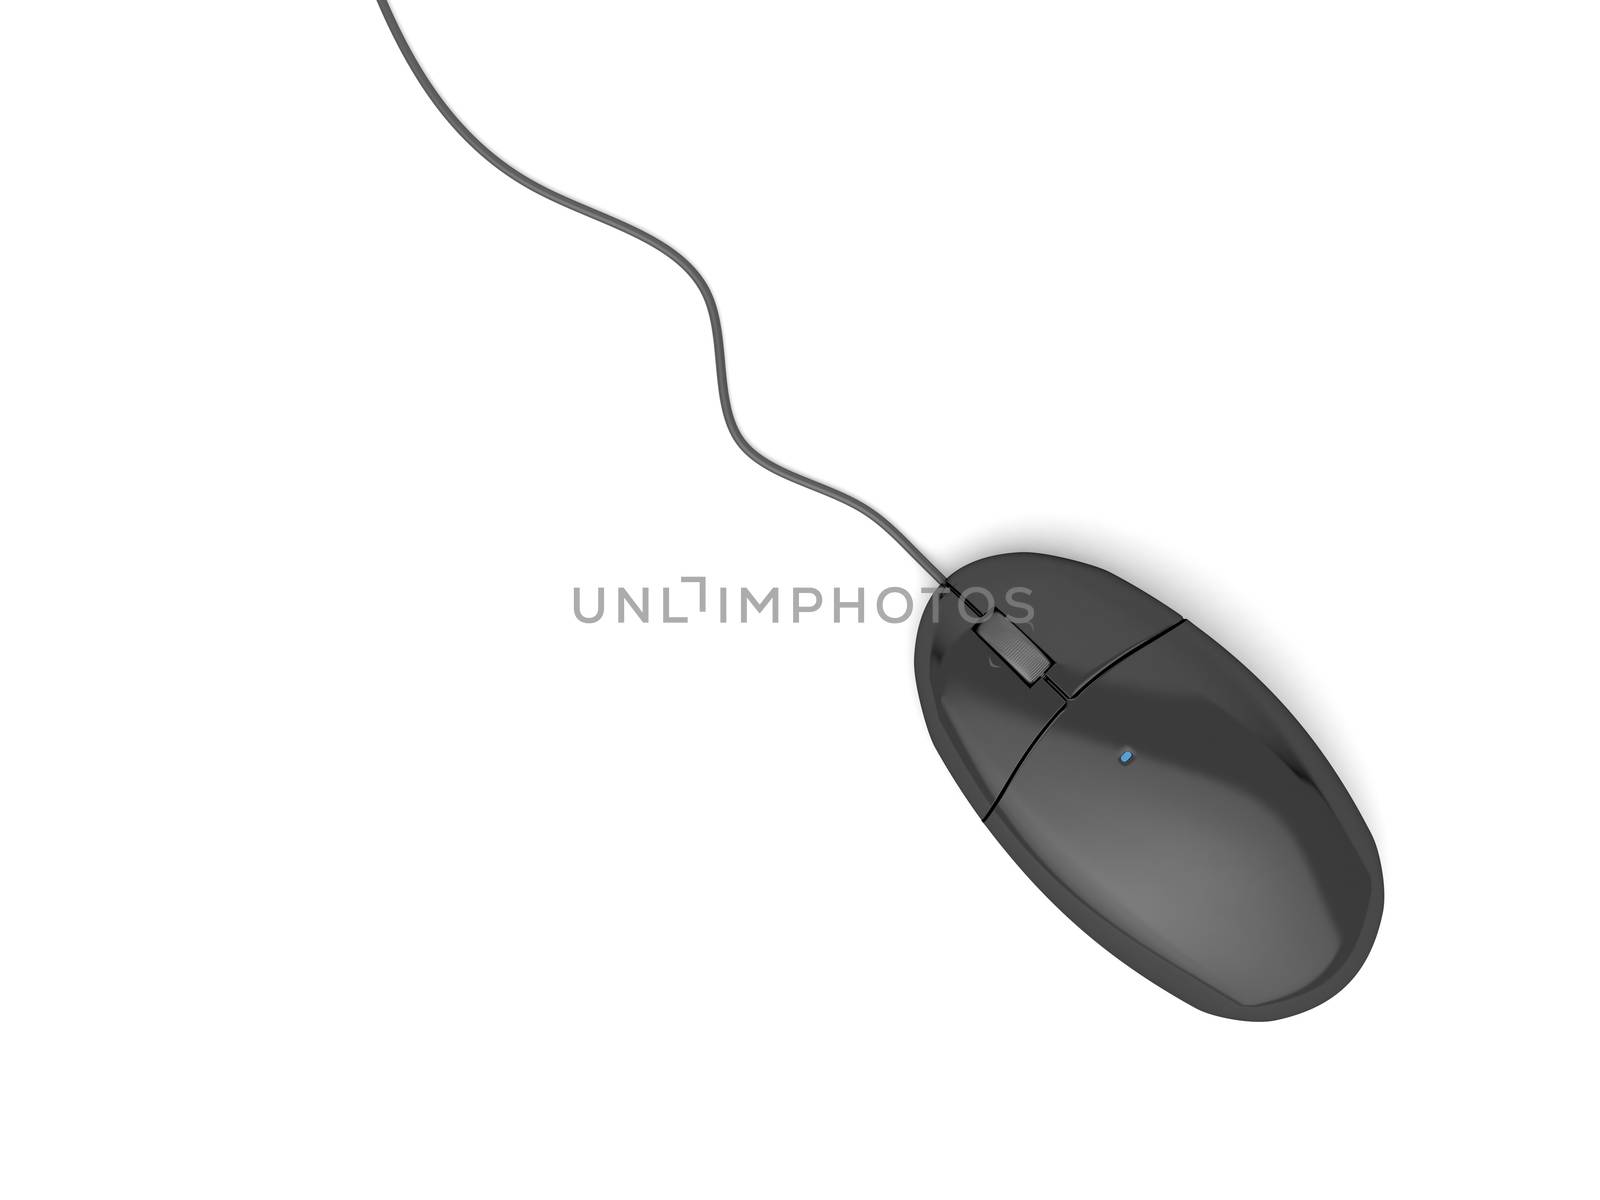 Black computer mouse on white background, top view 